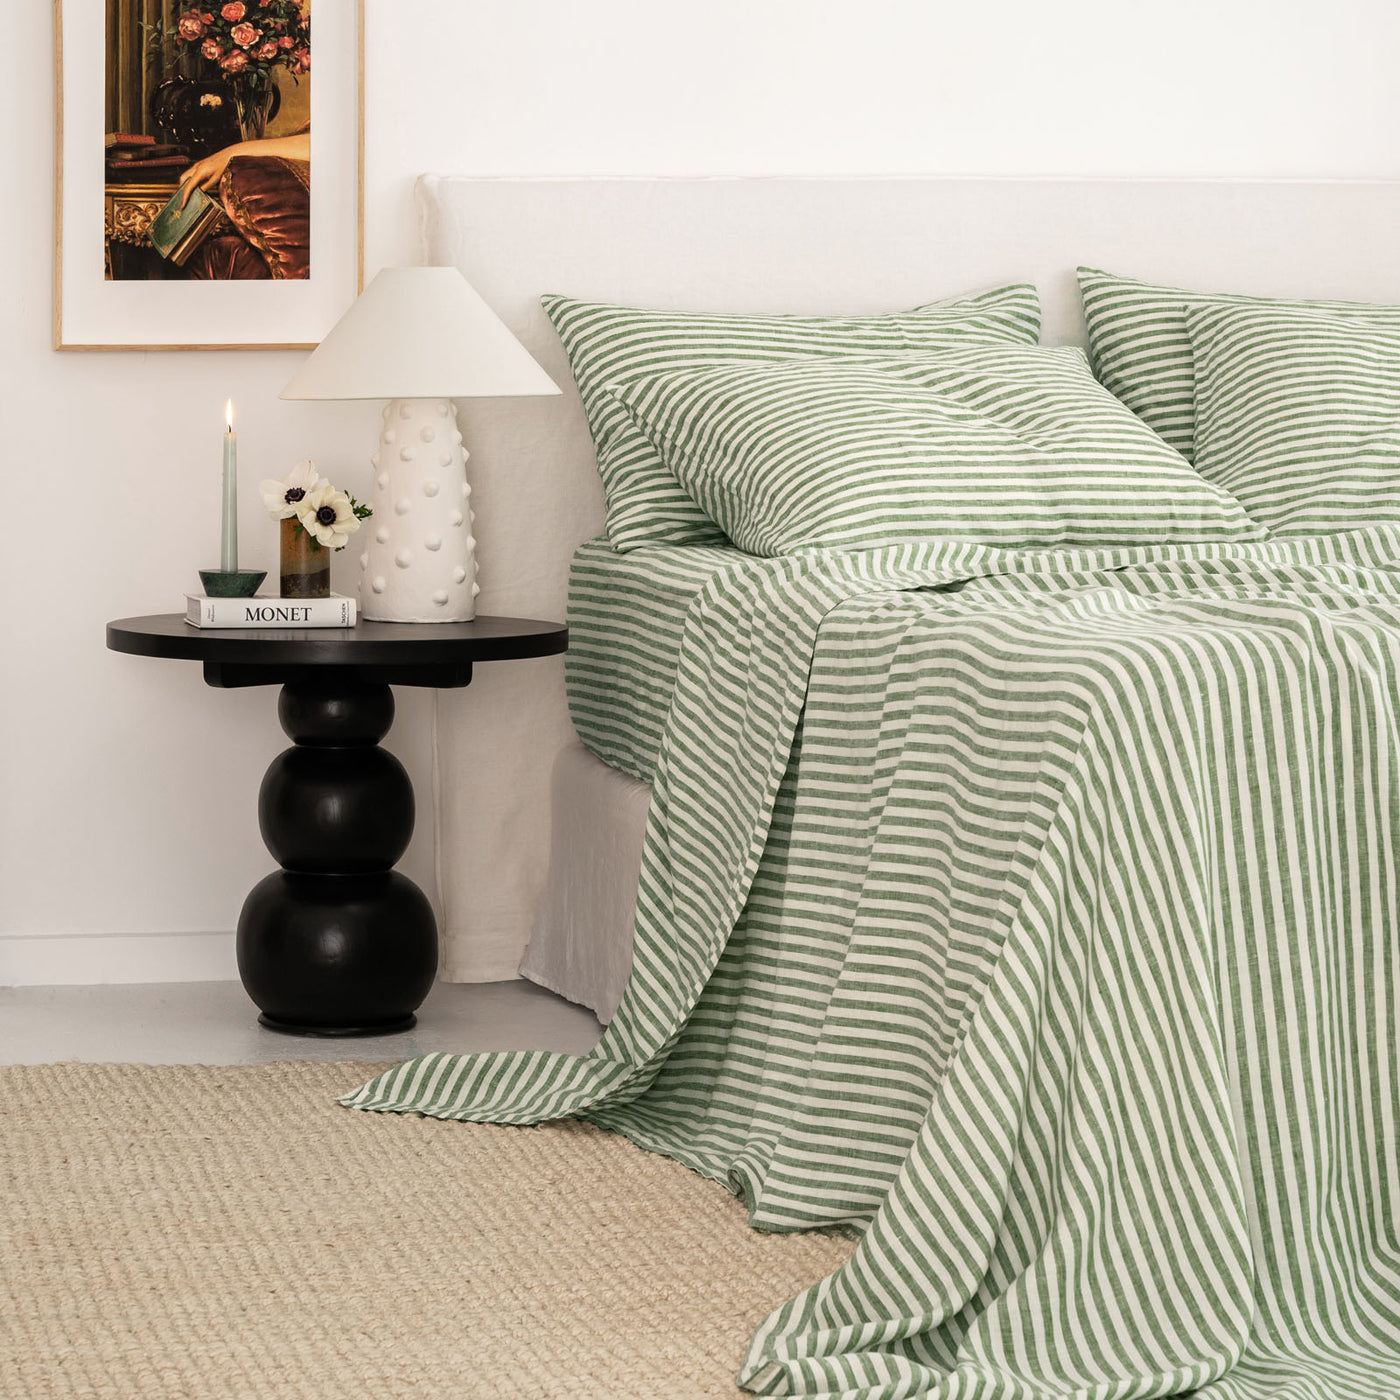 French Flax Linen Sheet Set in Ivy Stripe